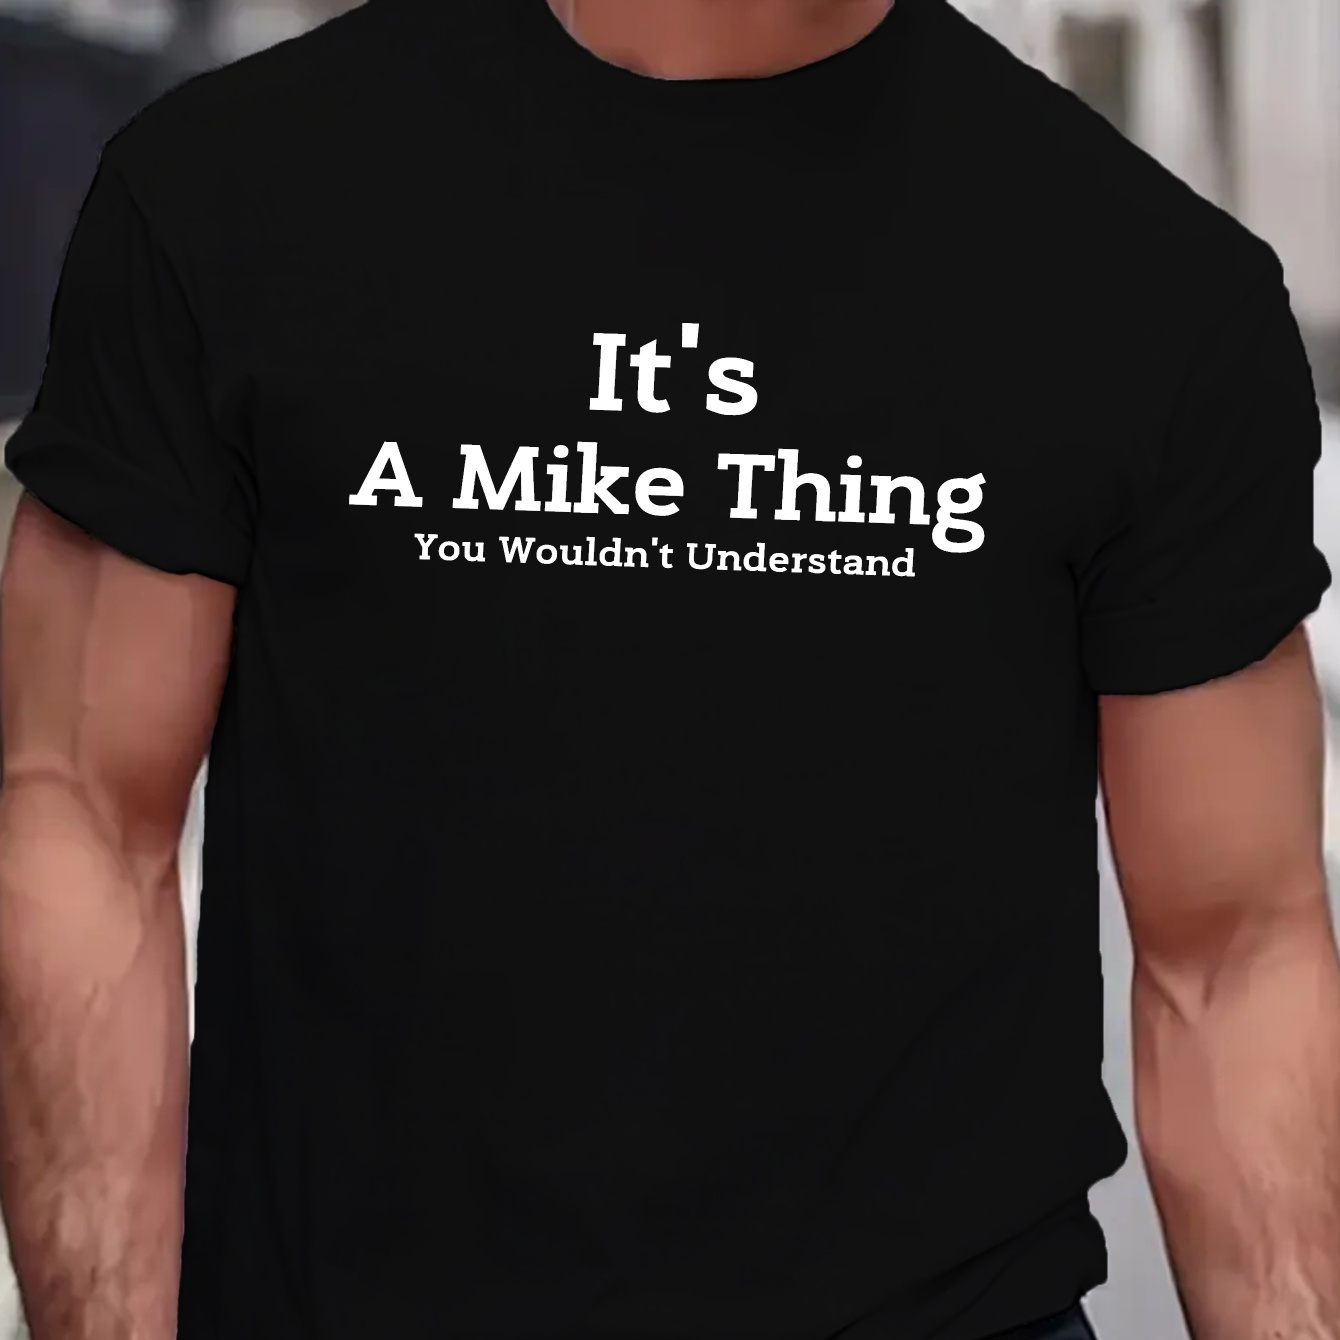 

1 Pc, 100% Cotton T-shirt, It's A Mike Thing... Print Tee Shirt, Tees For Men, Casual Short Sleeve T-shirt For Summer